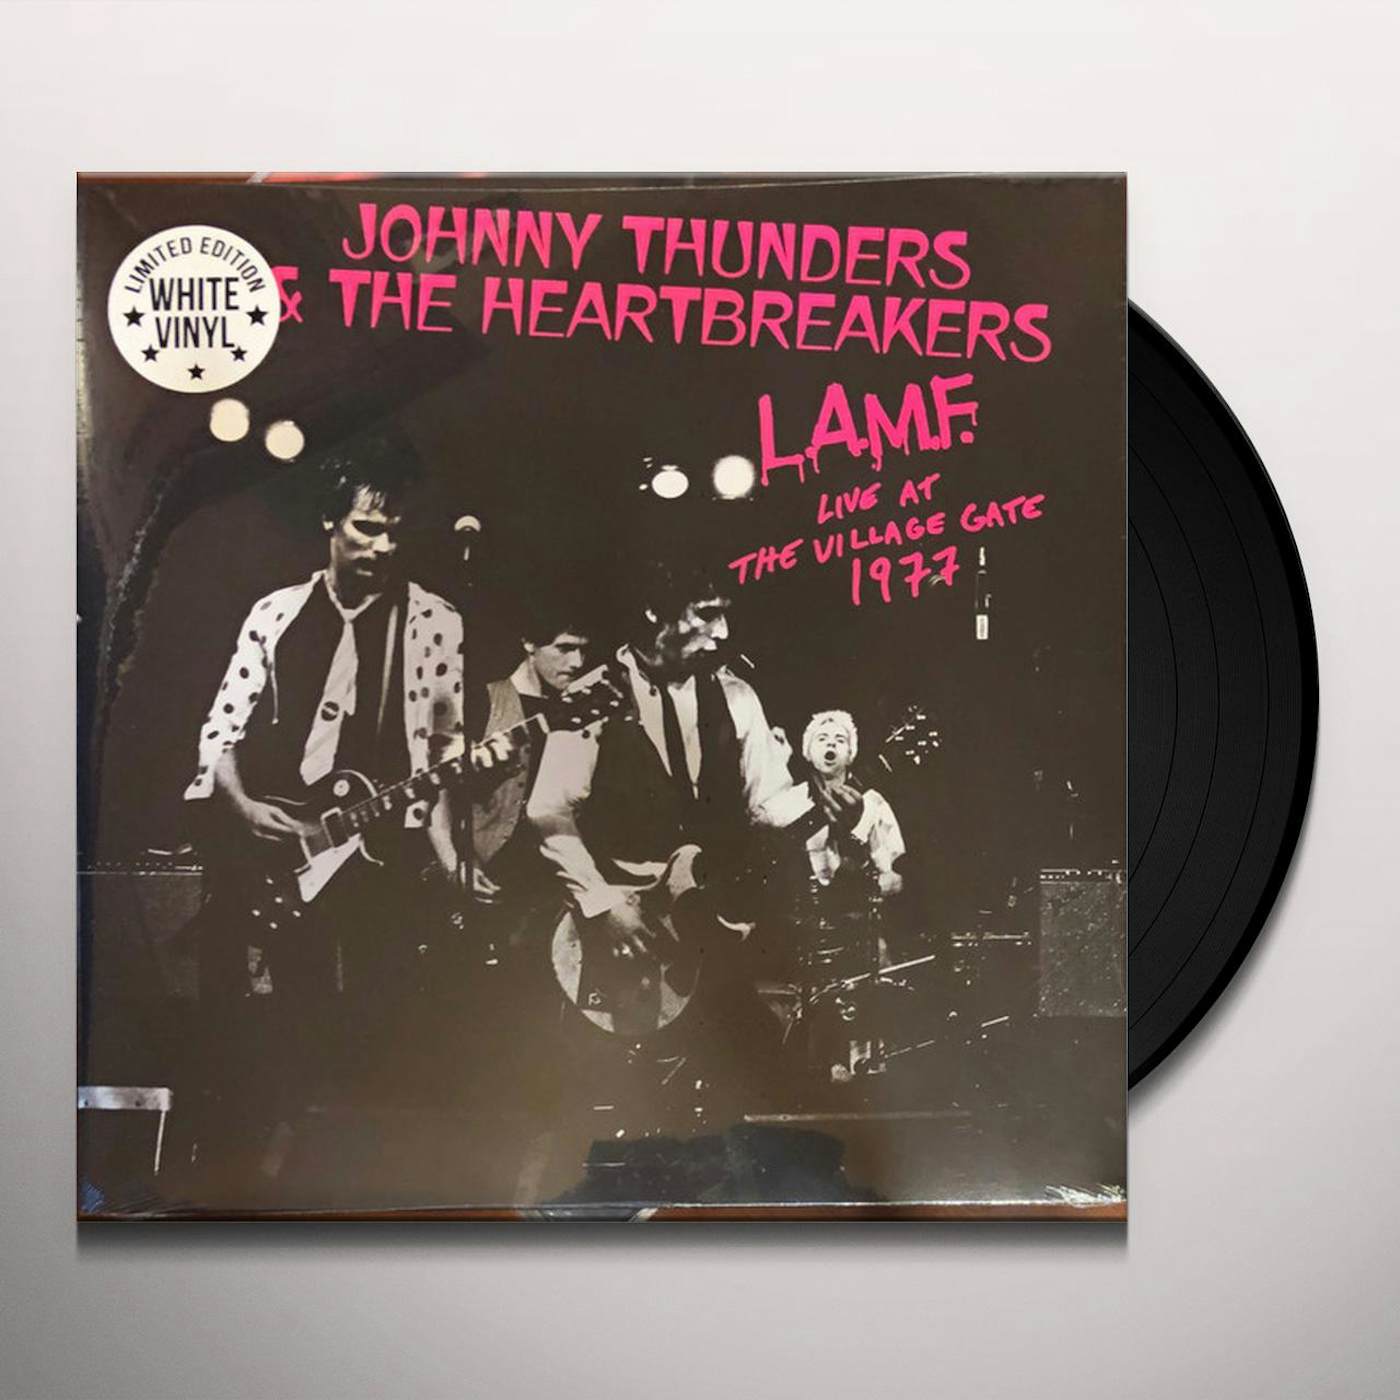 Johnny Thunders & The Heartbreakers L.A.M.F. Live at the Village Gate 1977 Vinyl Record